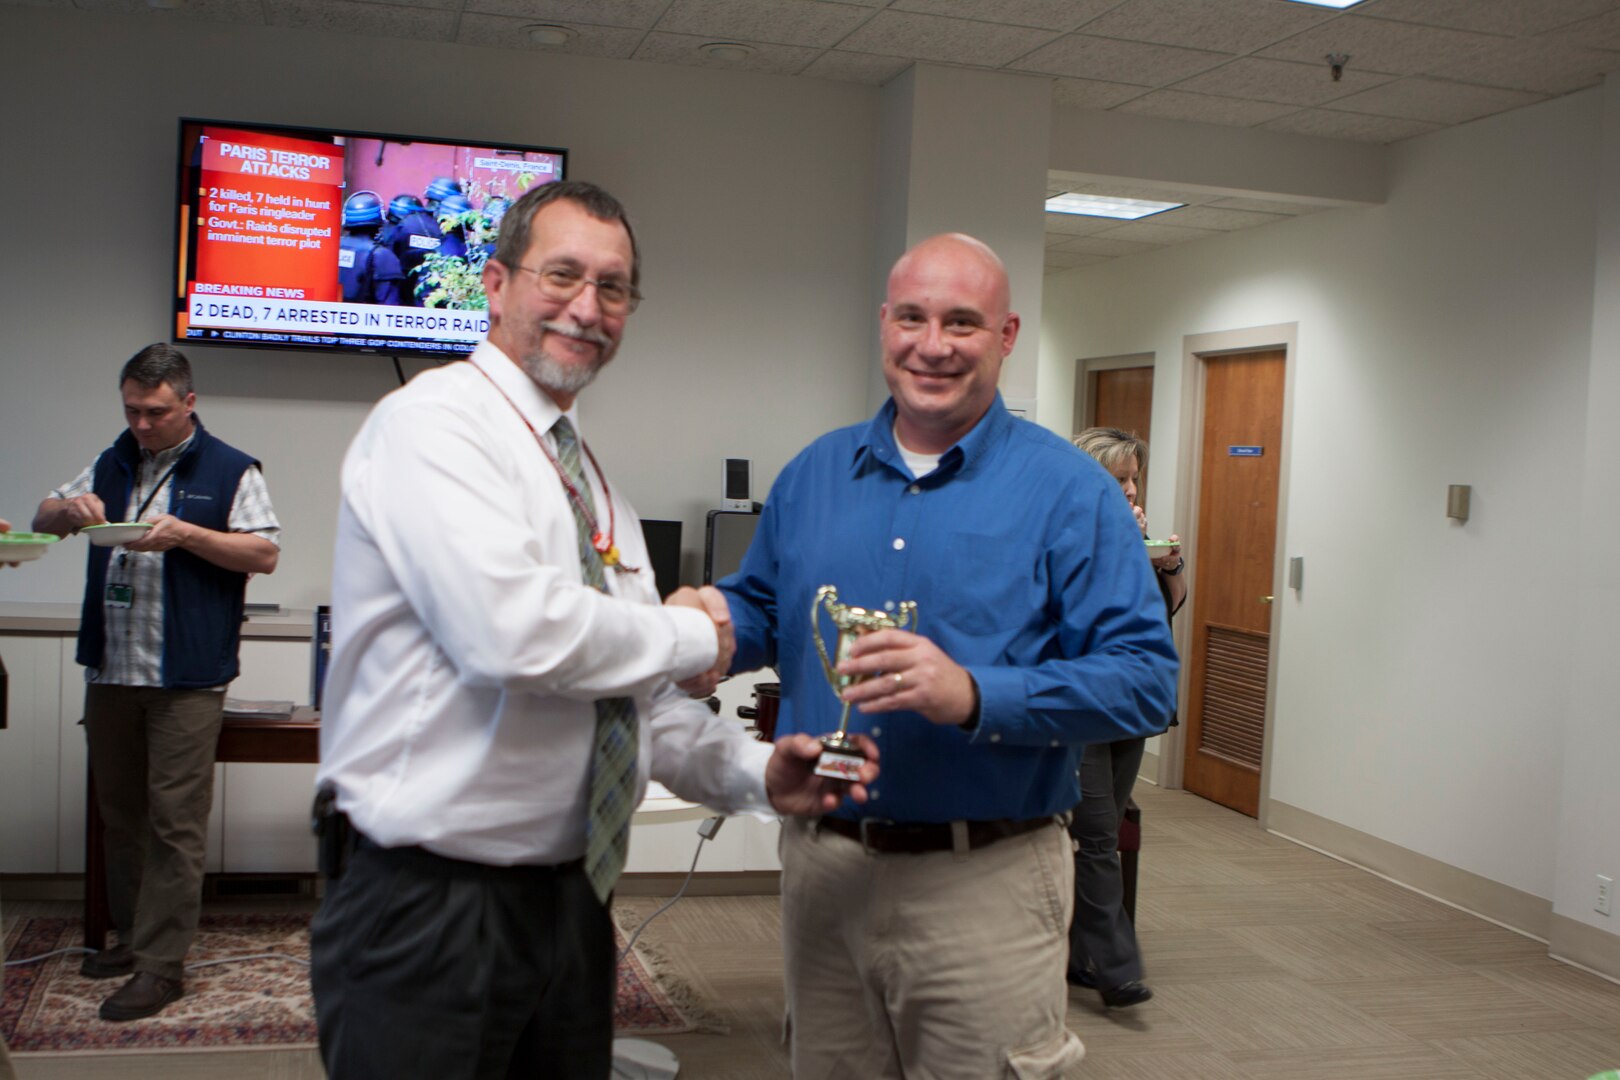 Jim Blockus, DLA Future Operations, presents Kevin Davis, Command Affairs, with his trophy for judge’s choice.